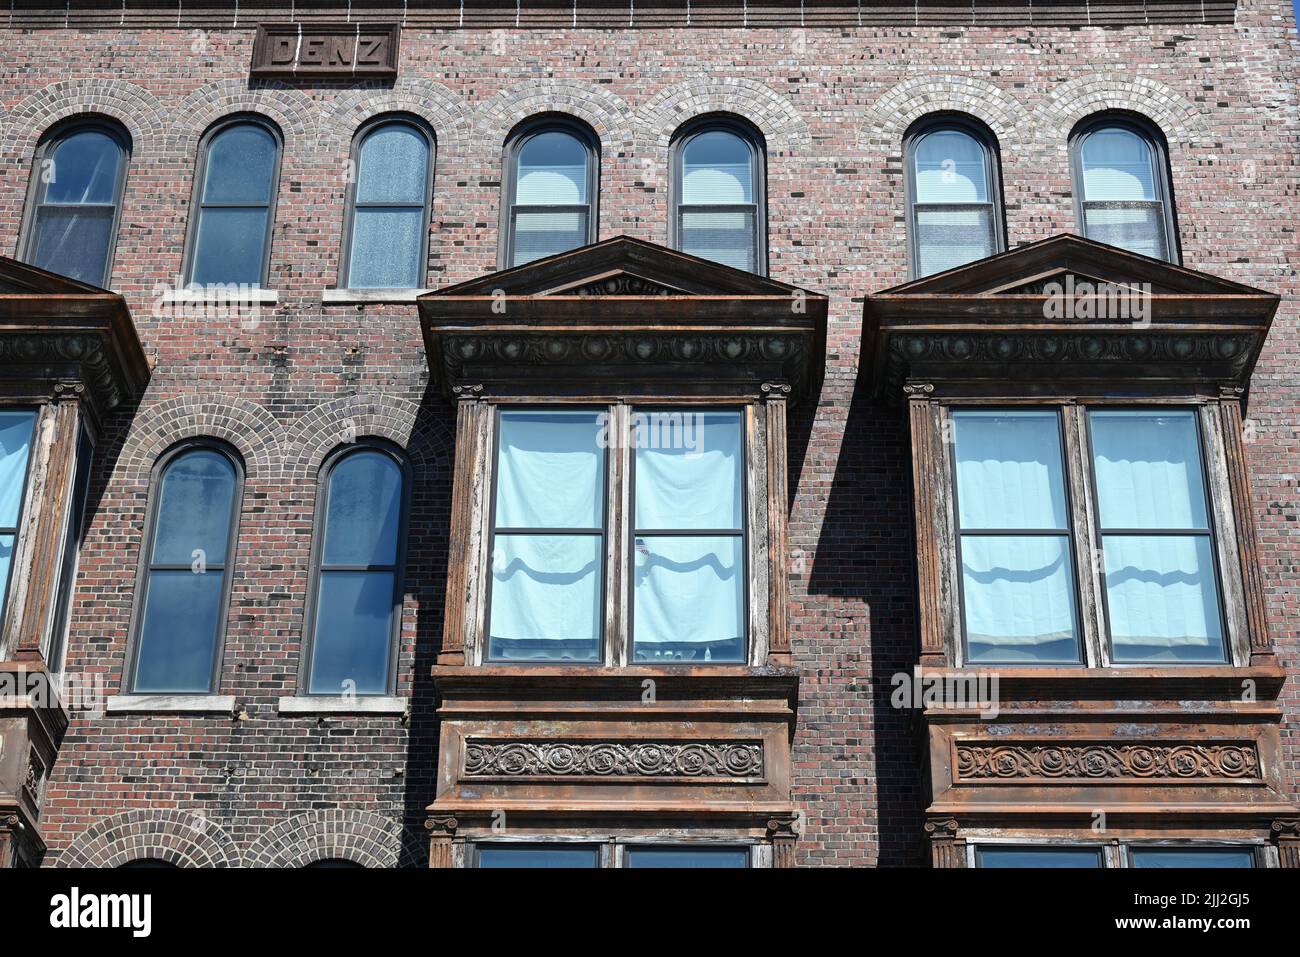 Facade of a vintage building in downtown Decatur, Illinois. Stock Photo